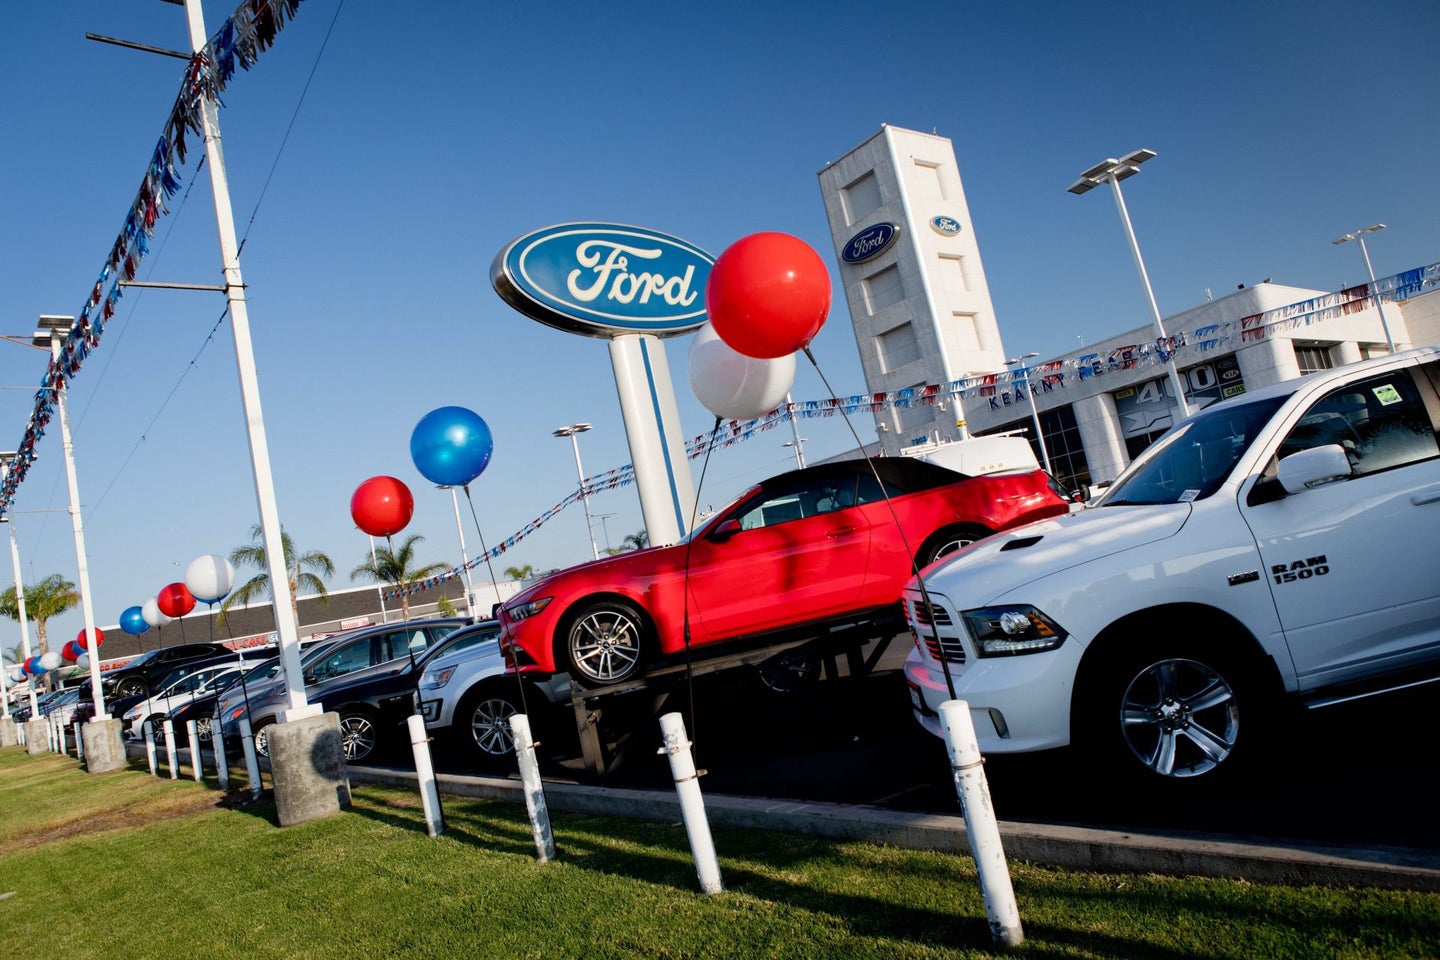 US Auto Sales in 2020 Are Already Off to a Troubling Start